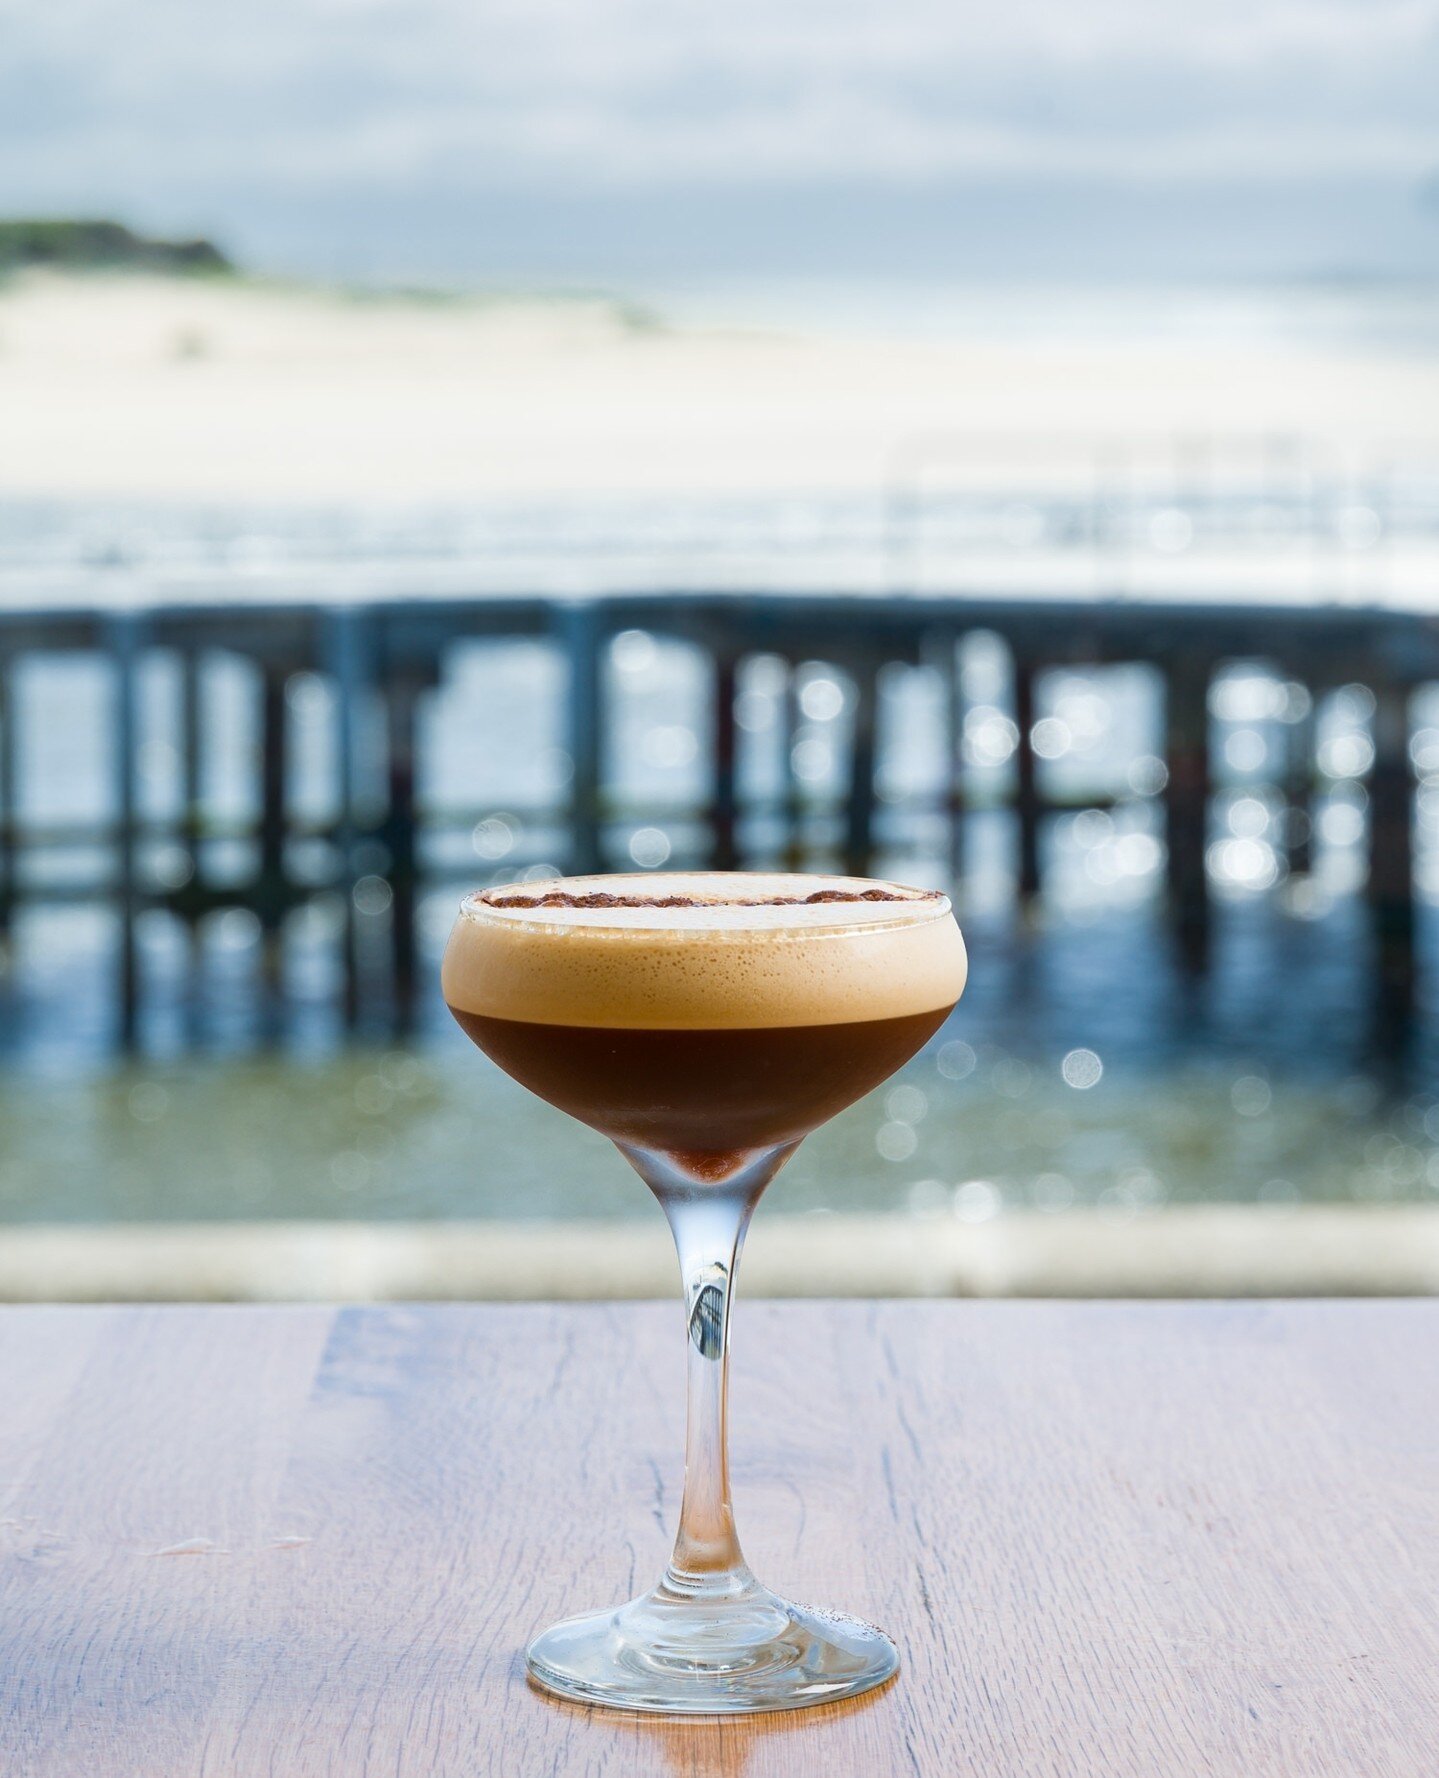 Grab your friends and come join us for a delicious espresso martini! Bring your appetite and get ready to be wowed - we guarantee you won't regret it! 😜